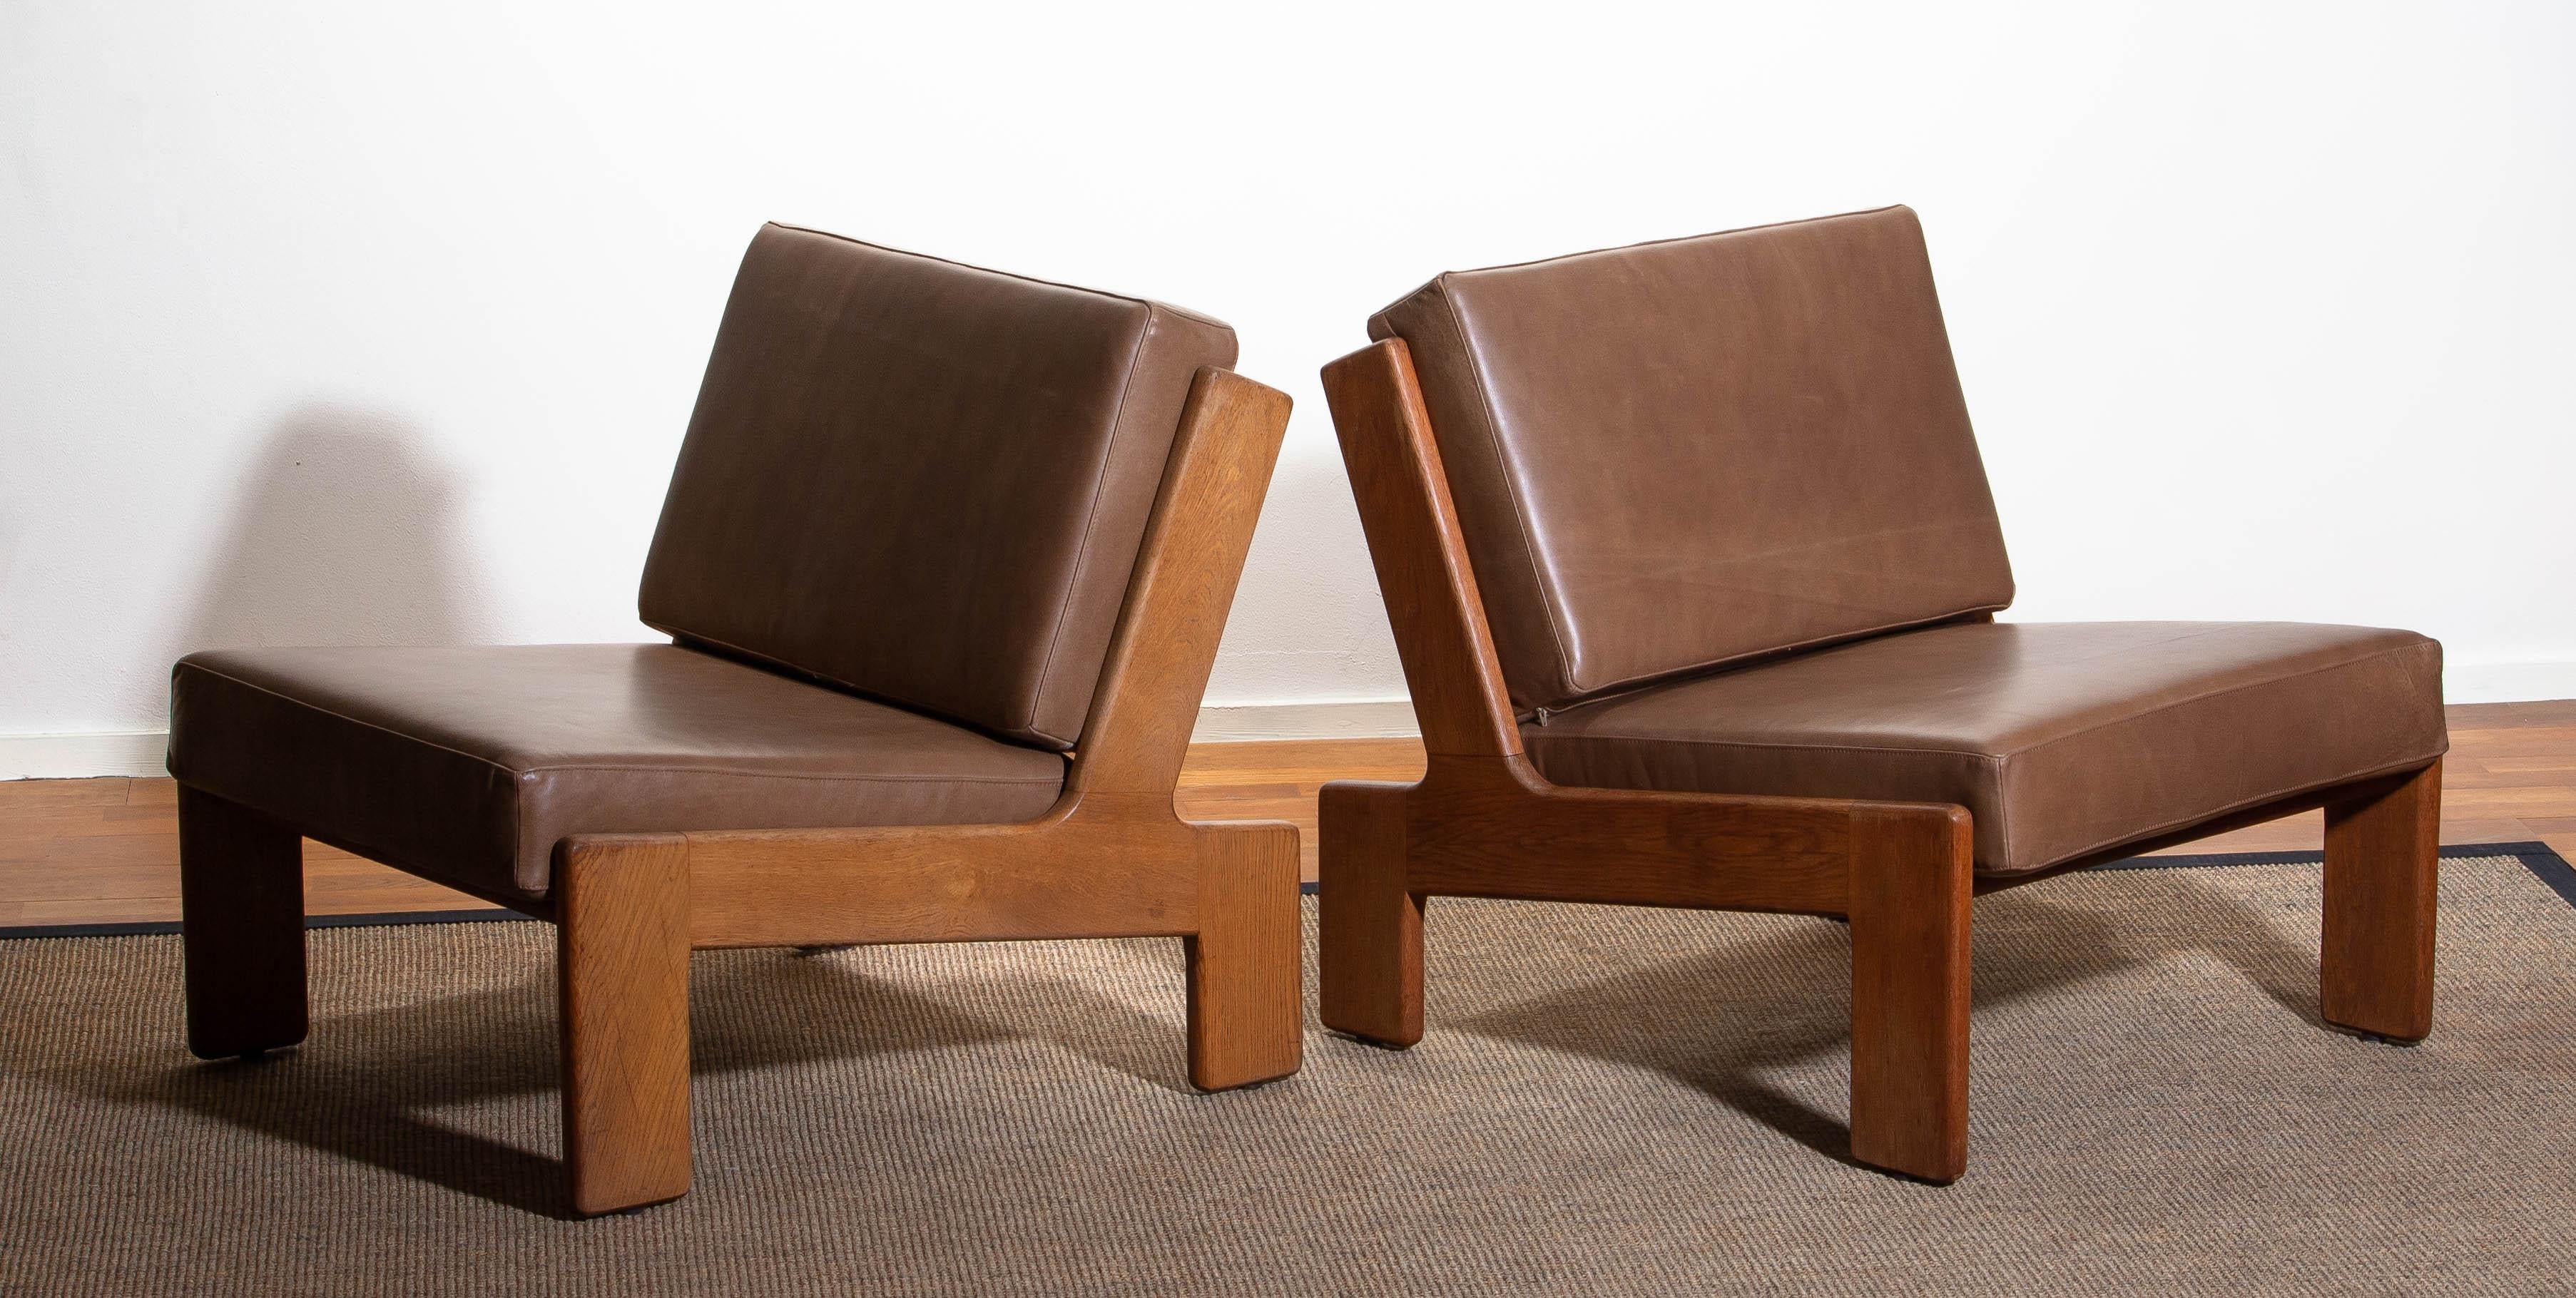 1960, Pair of Oak and Leather Cubist Lounge Chairs by Esko Pajamies for Asko 1